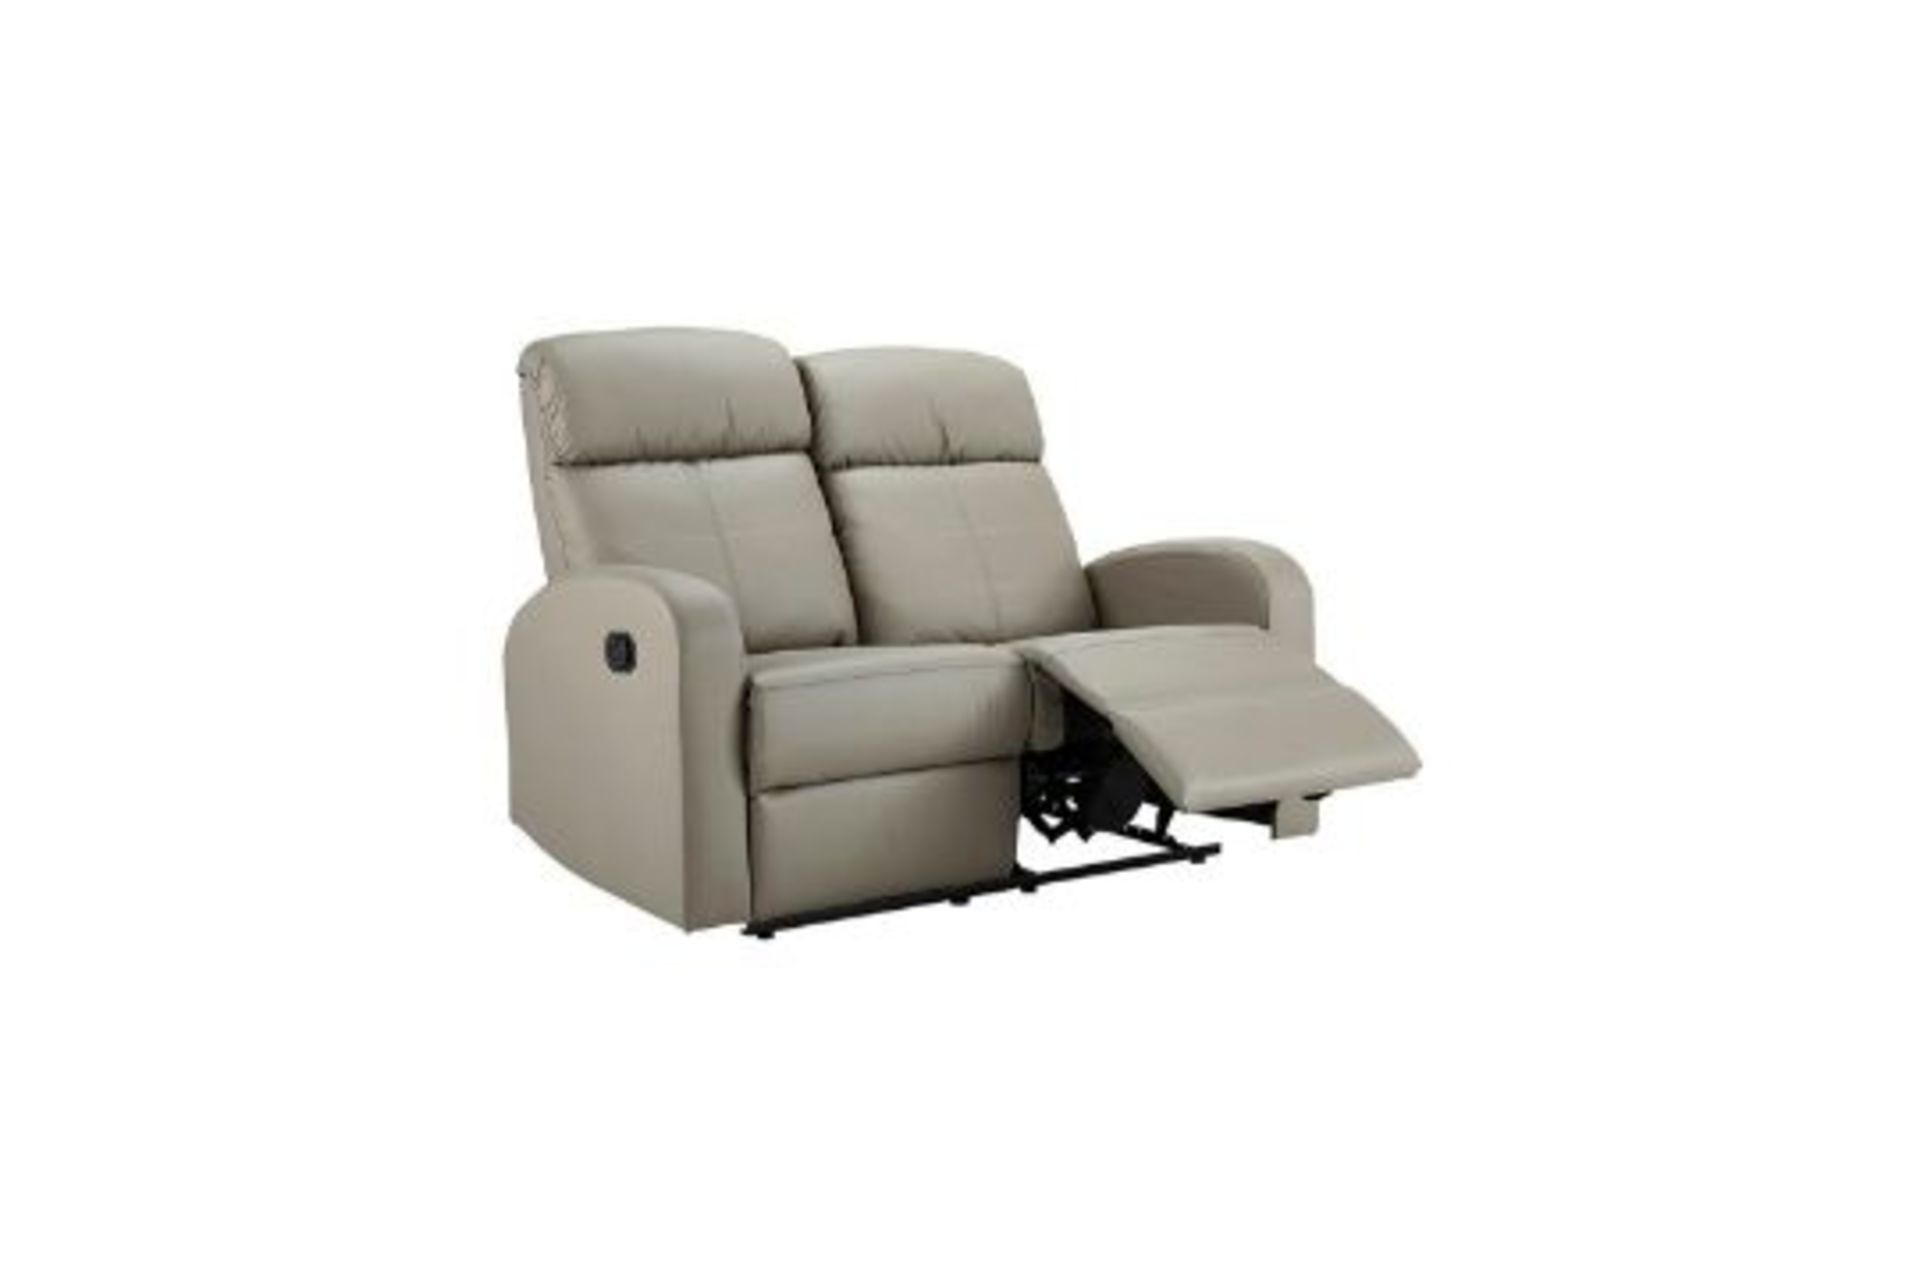 Ramsey Faux Leather Recliner 2 Seater Sofa. - SR4